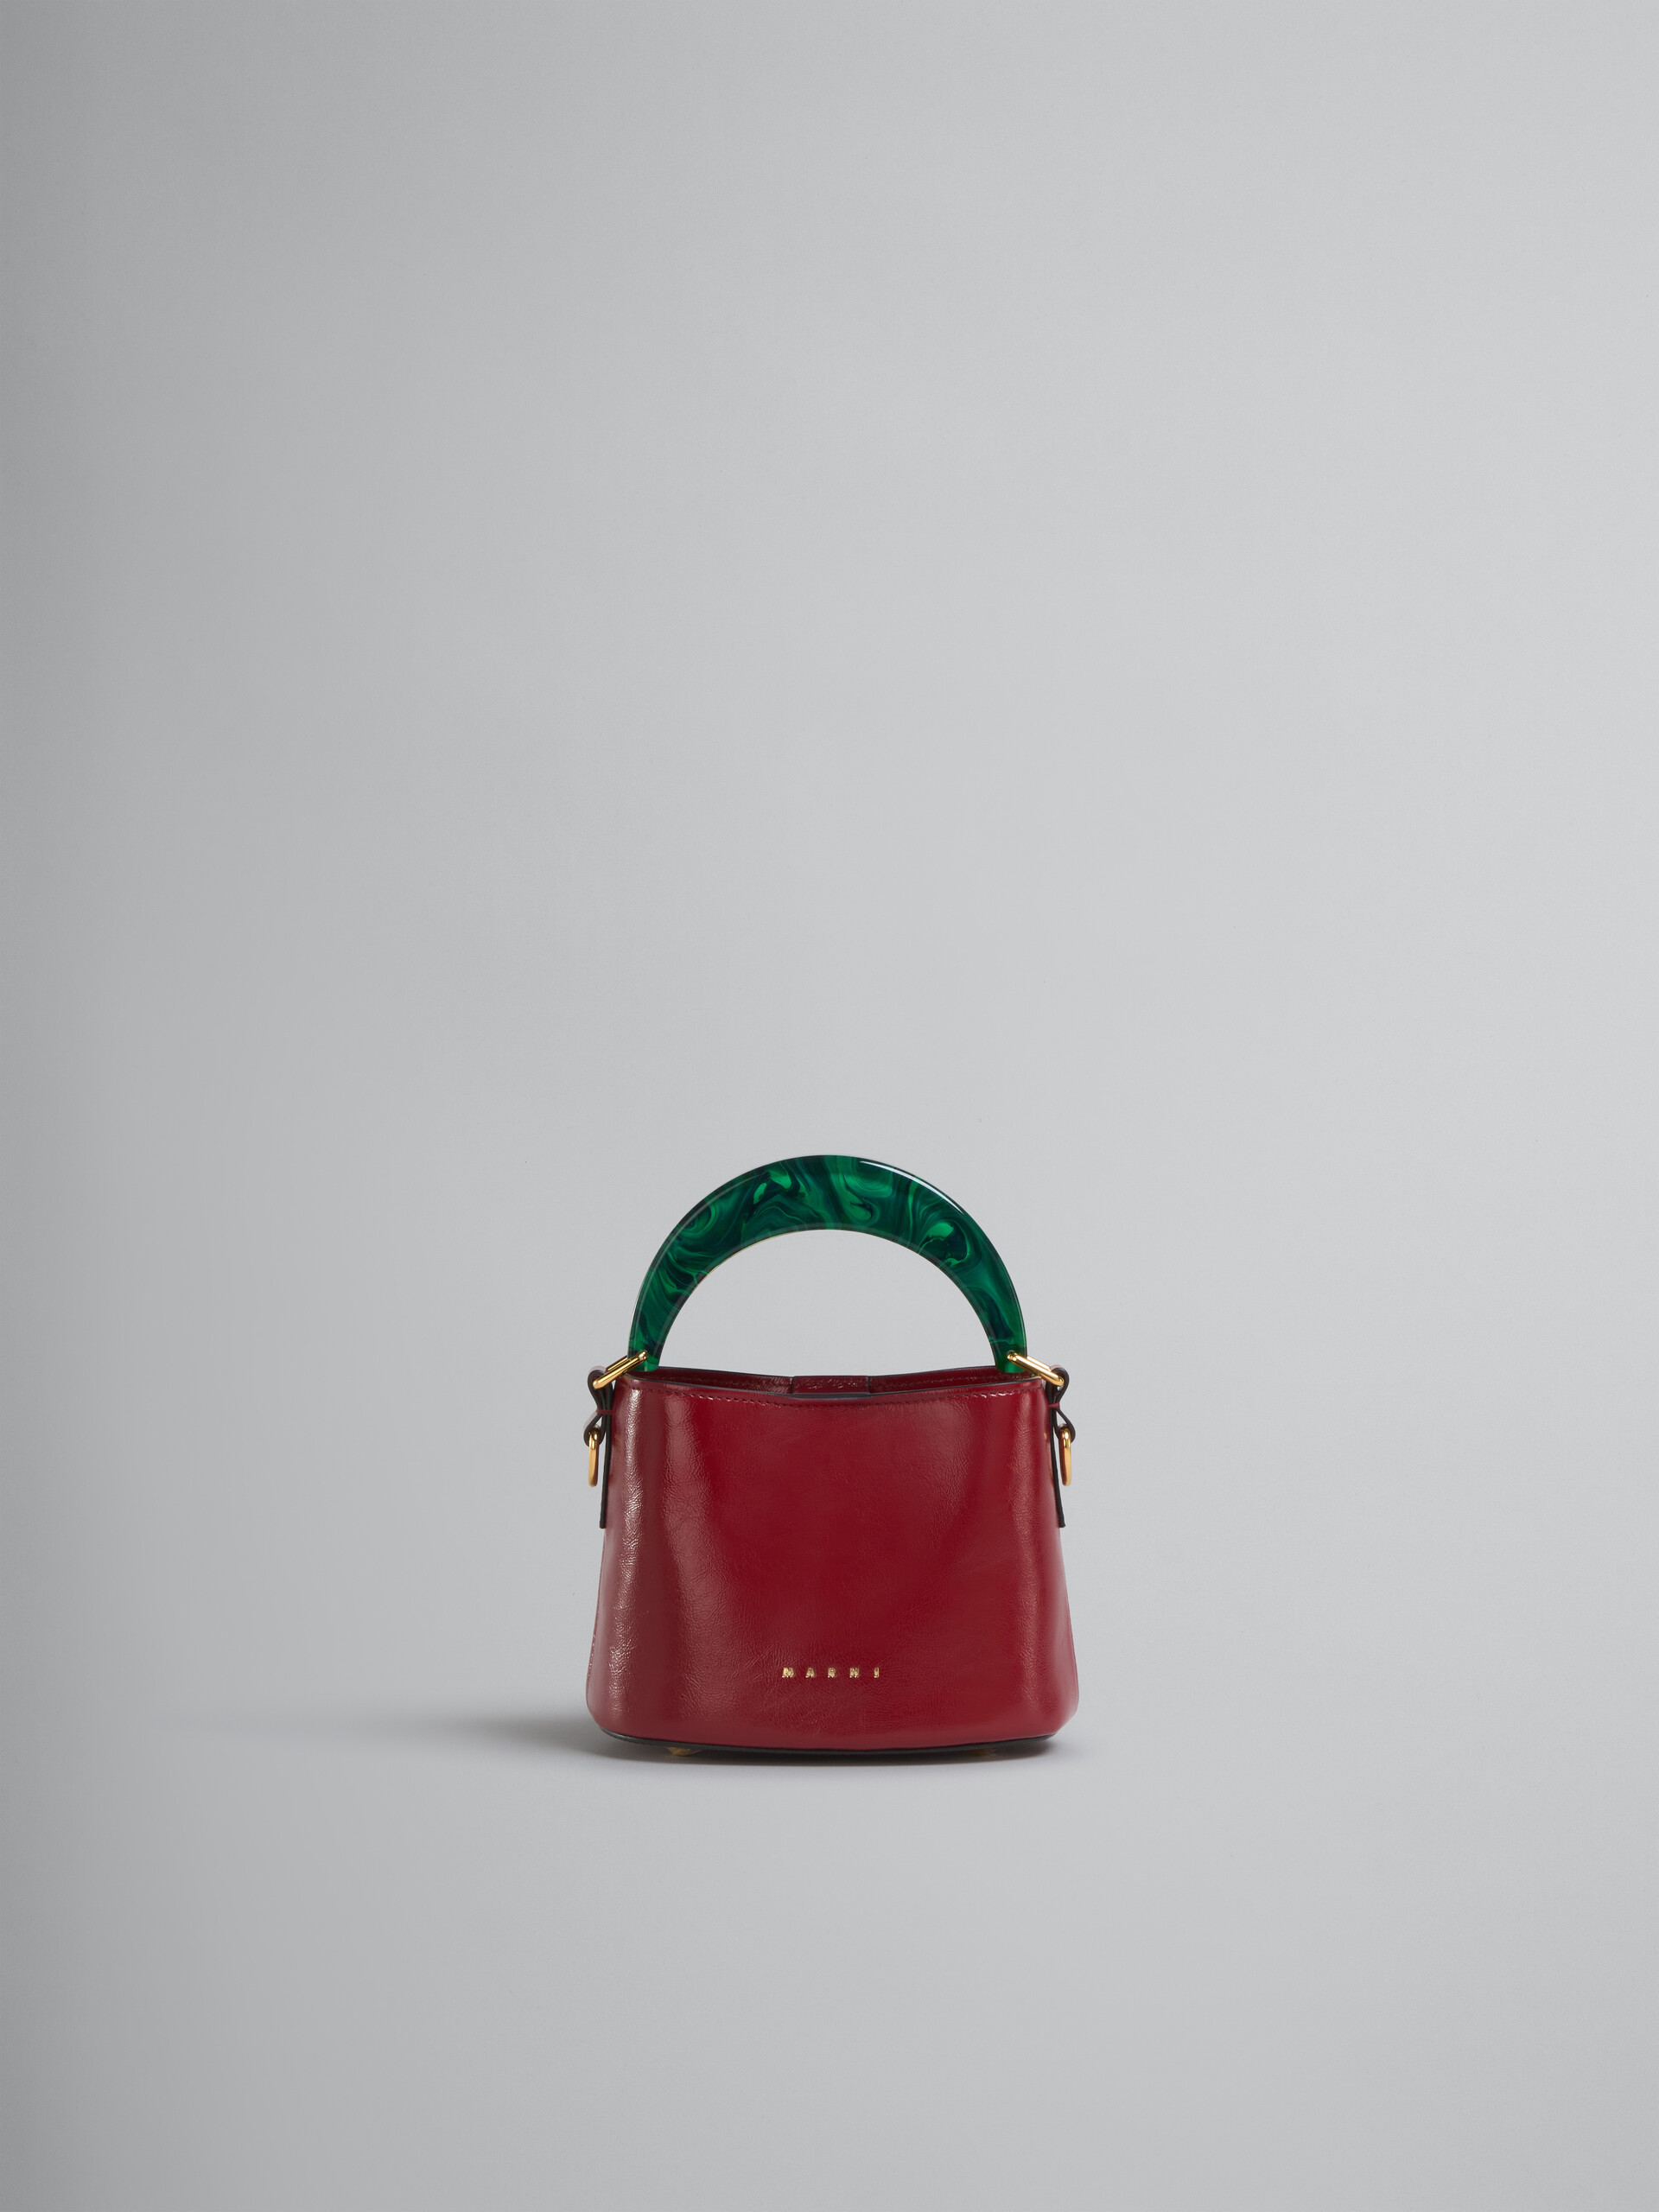 Venice Mini Bucket Bag in ruby red patent leather - Shoulder Bags - Image 1